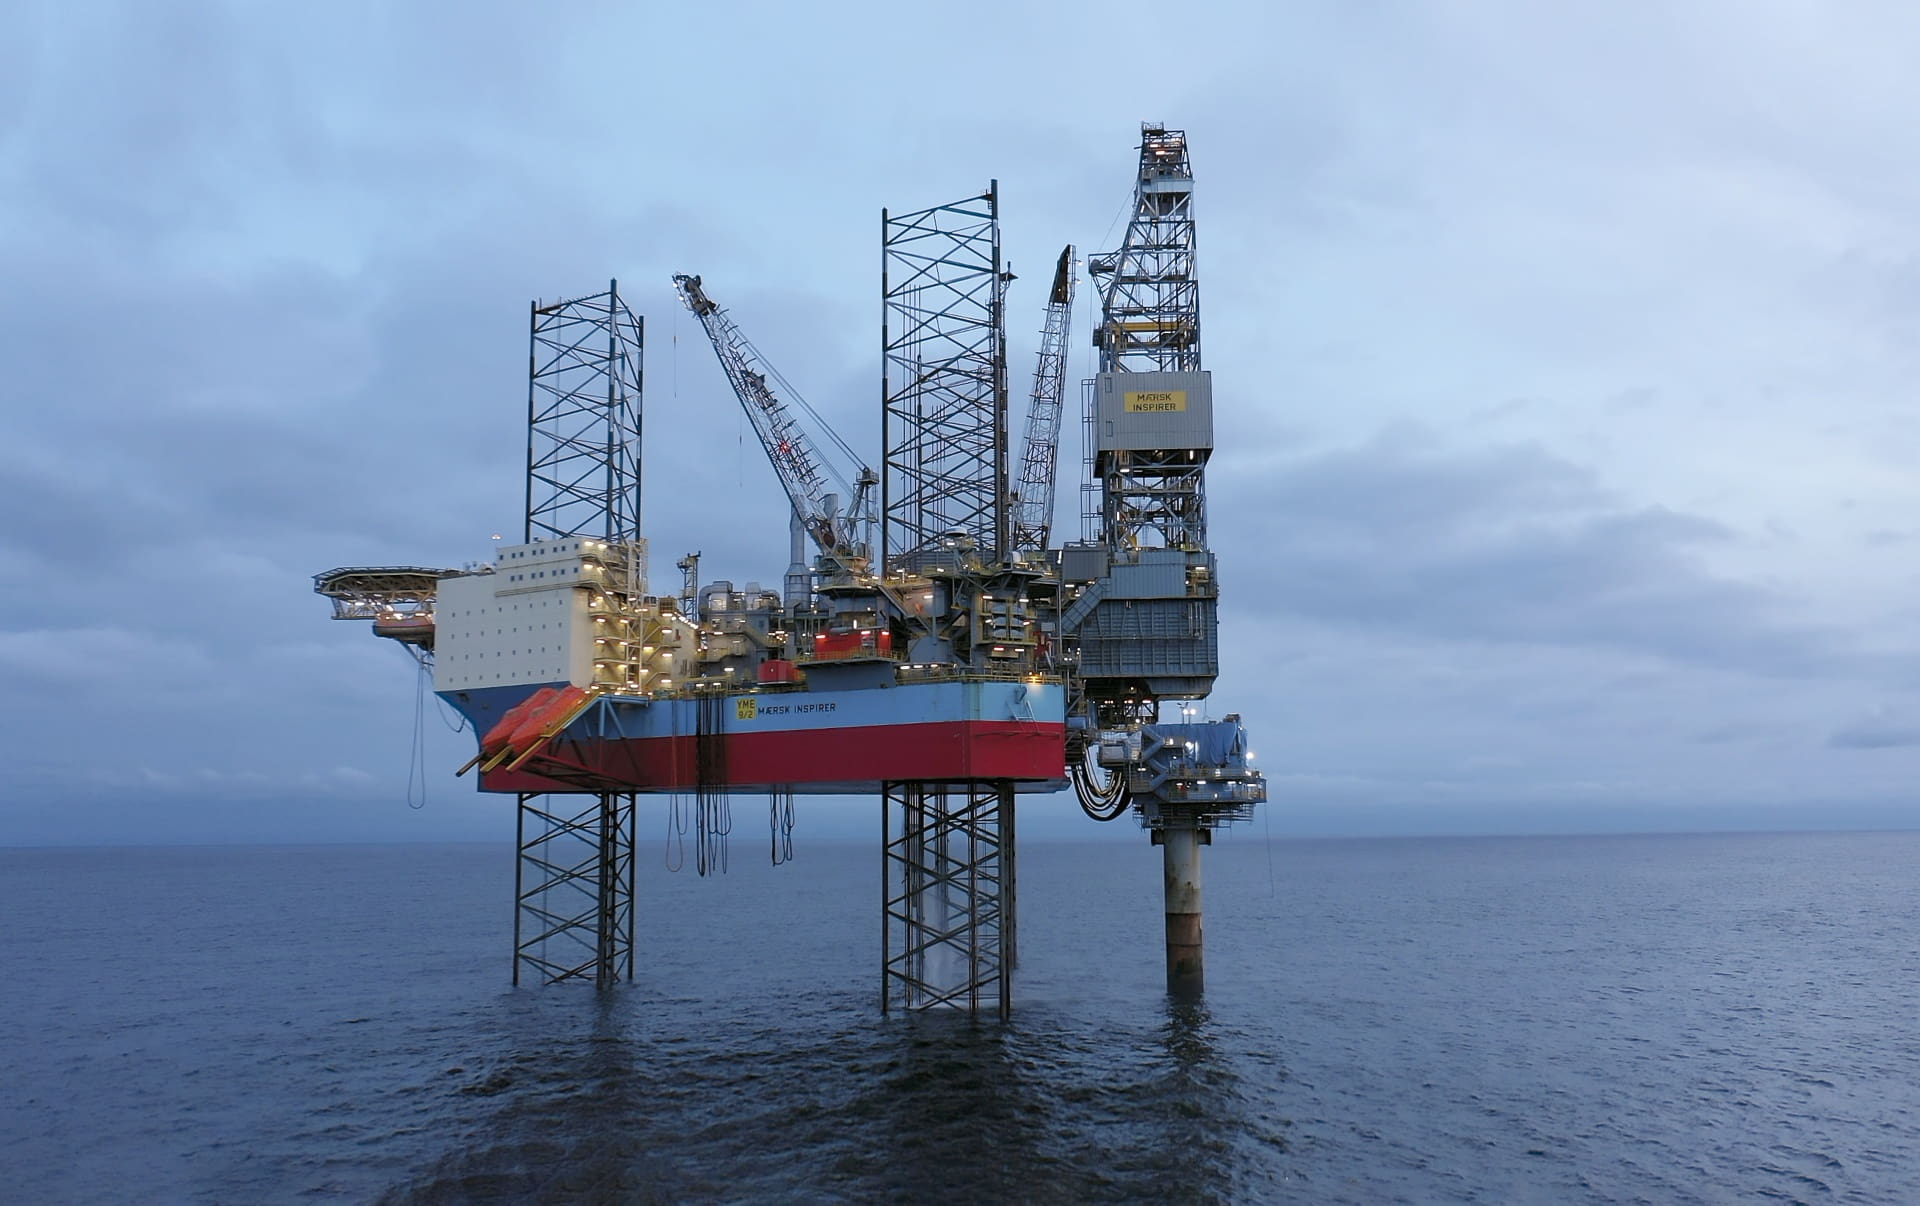 Inspirer rig; Source: Repsol Norge